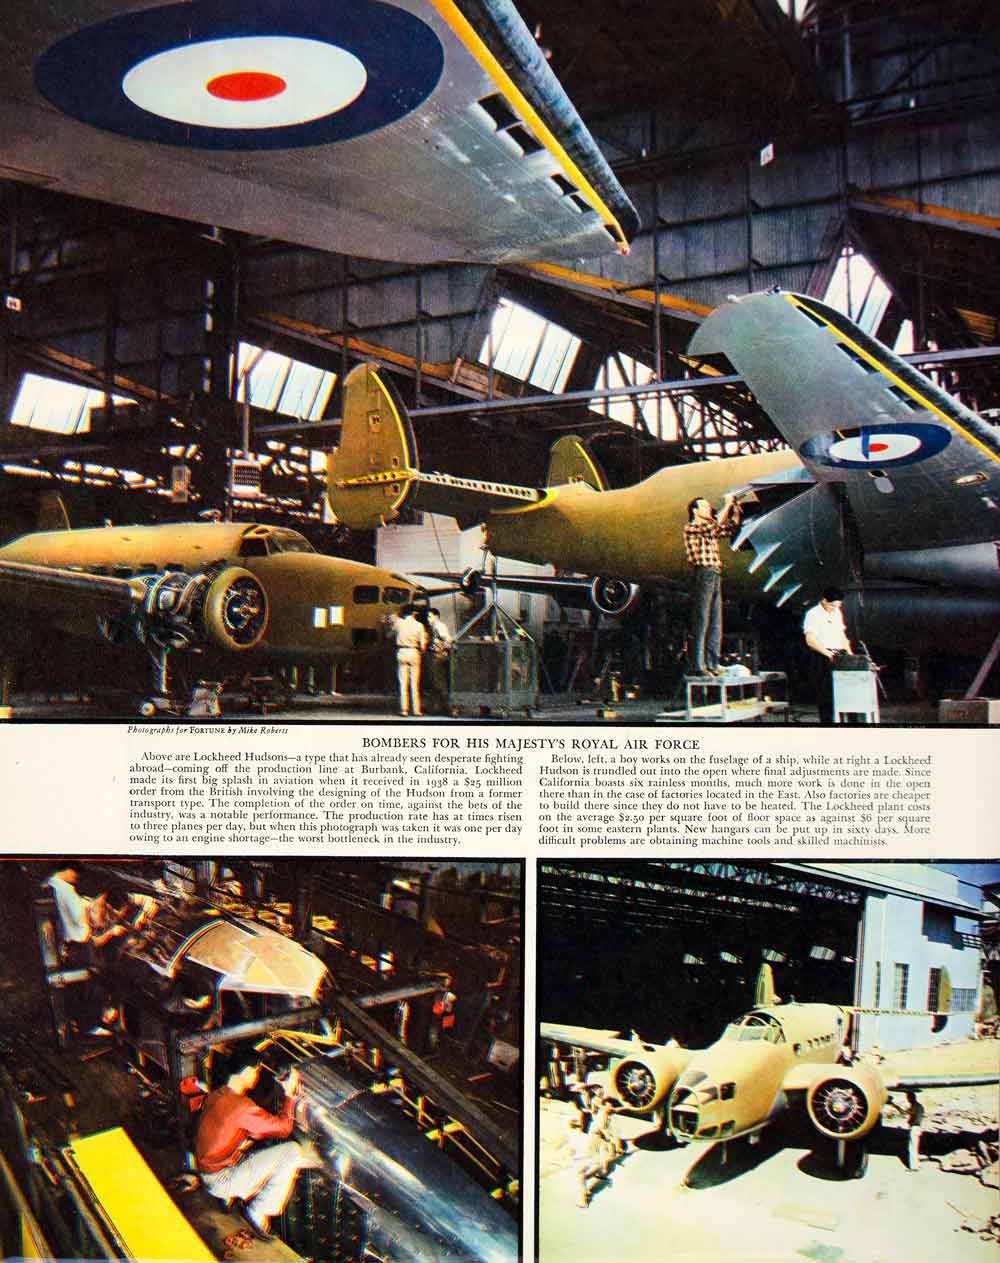 1940 Color Print Majesty Royaly Air Force Aviation Airplane Bomber Hanger YFT1